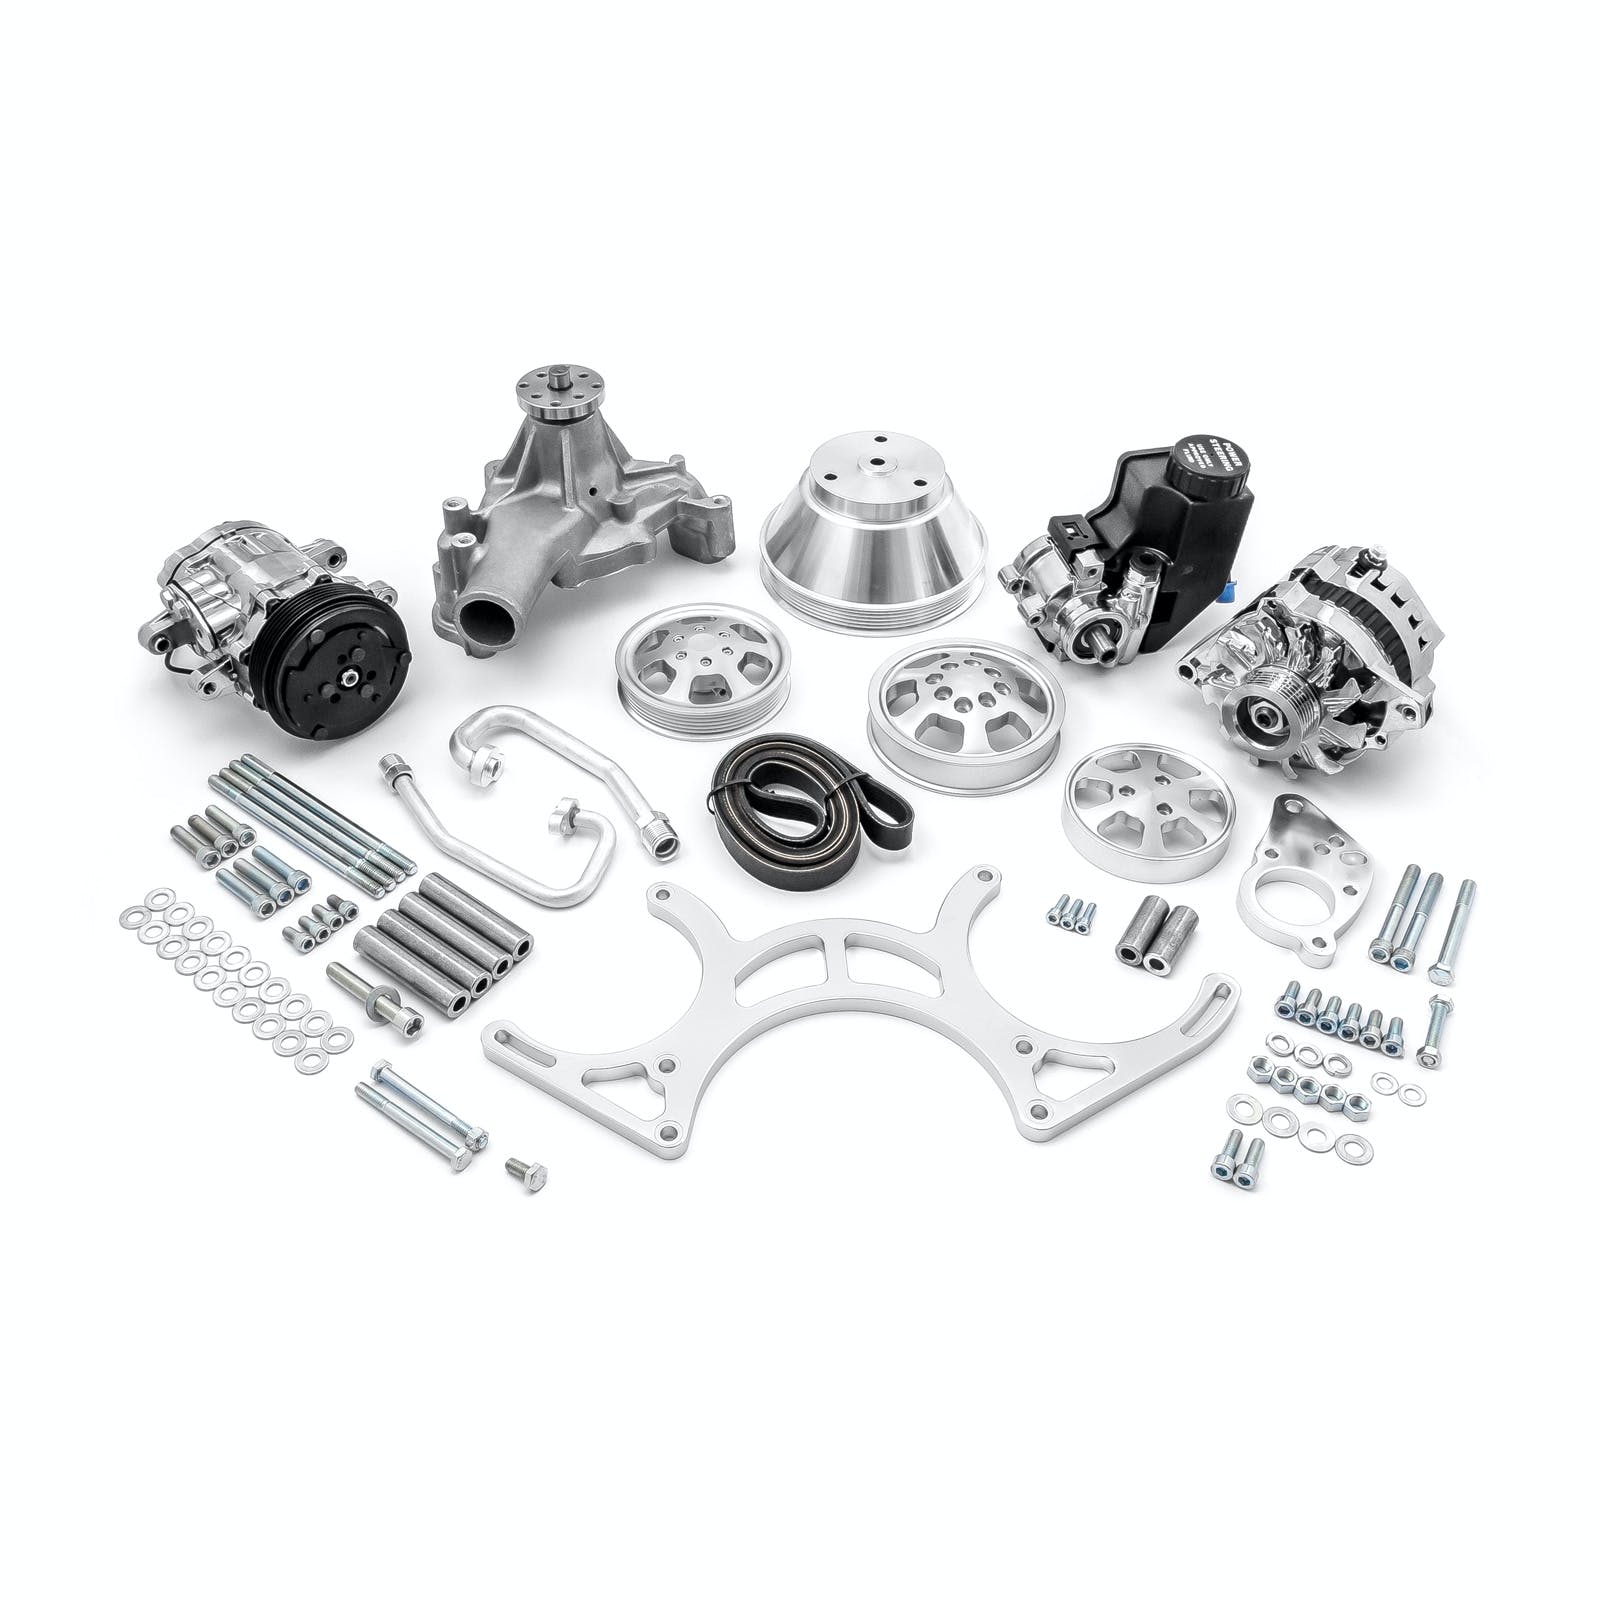 Speedmaster PCE415.1051 Aluminum Serpentine Complete Engine Pulley and Components Kit